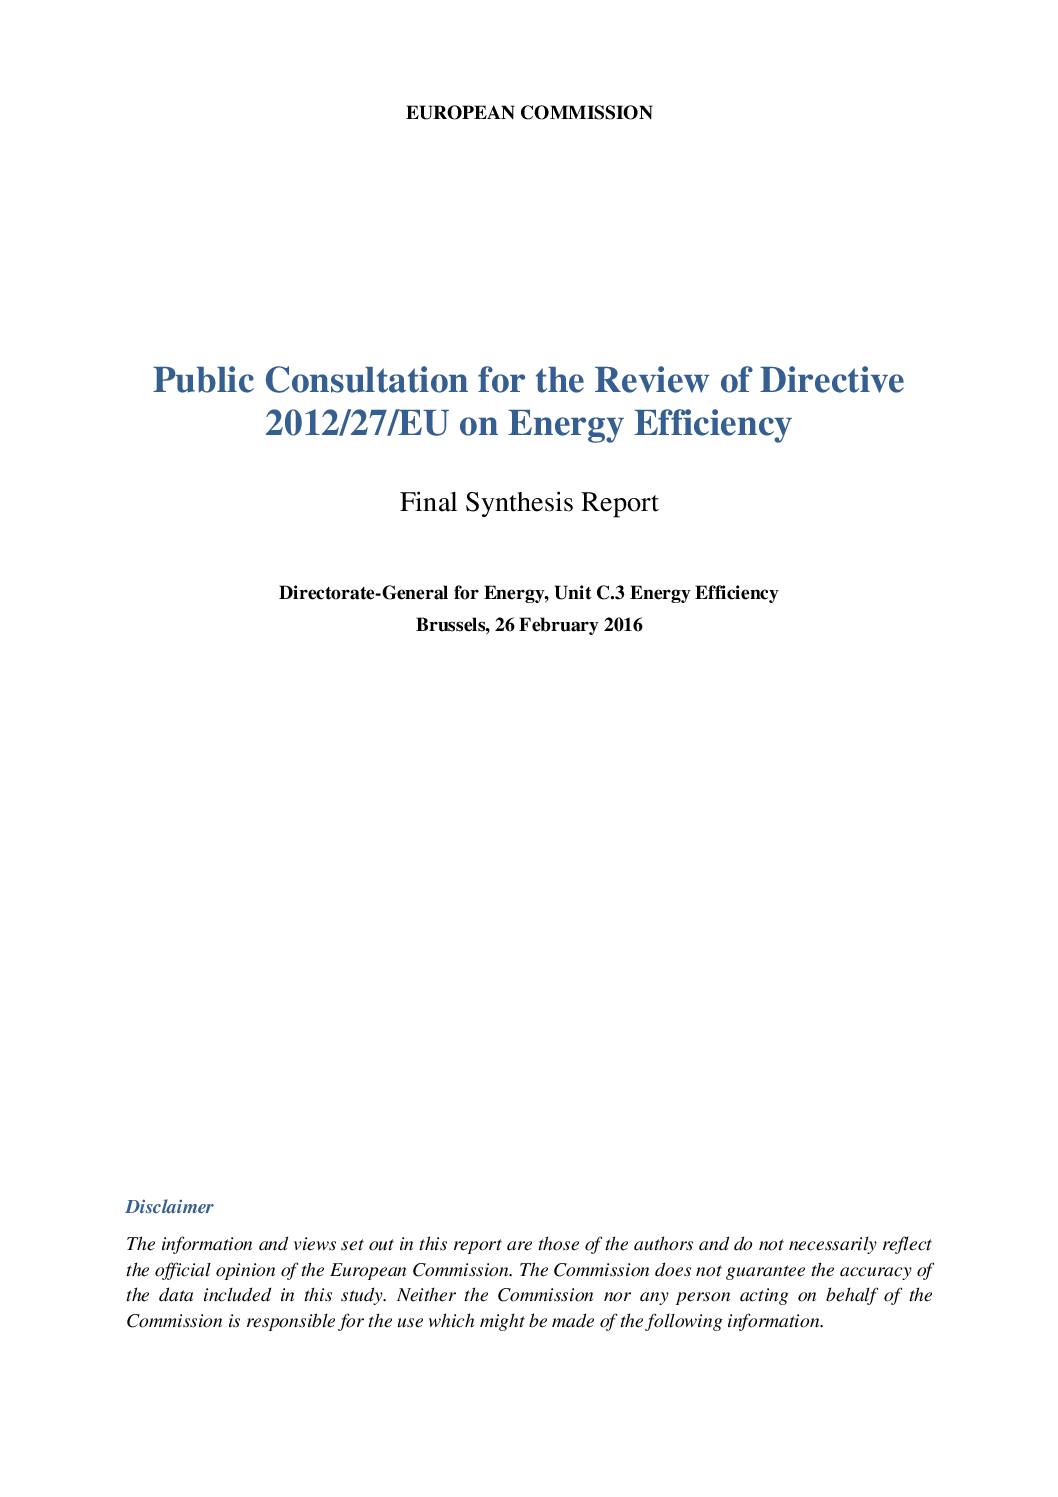 Public Consultation for the Review of Directive 2012/27/EU on Energy Efficiency